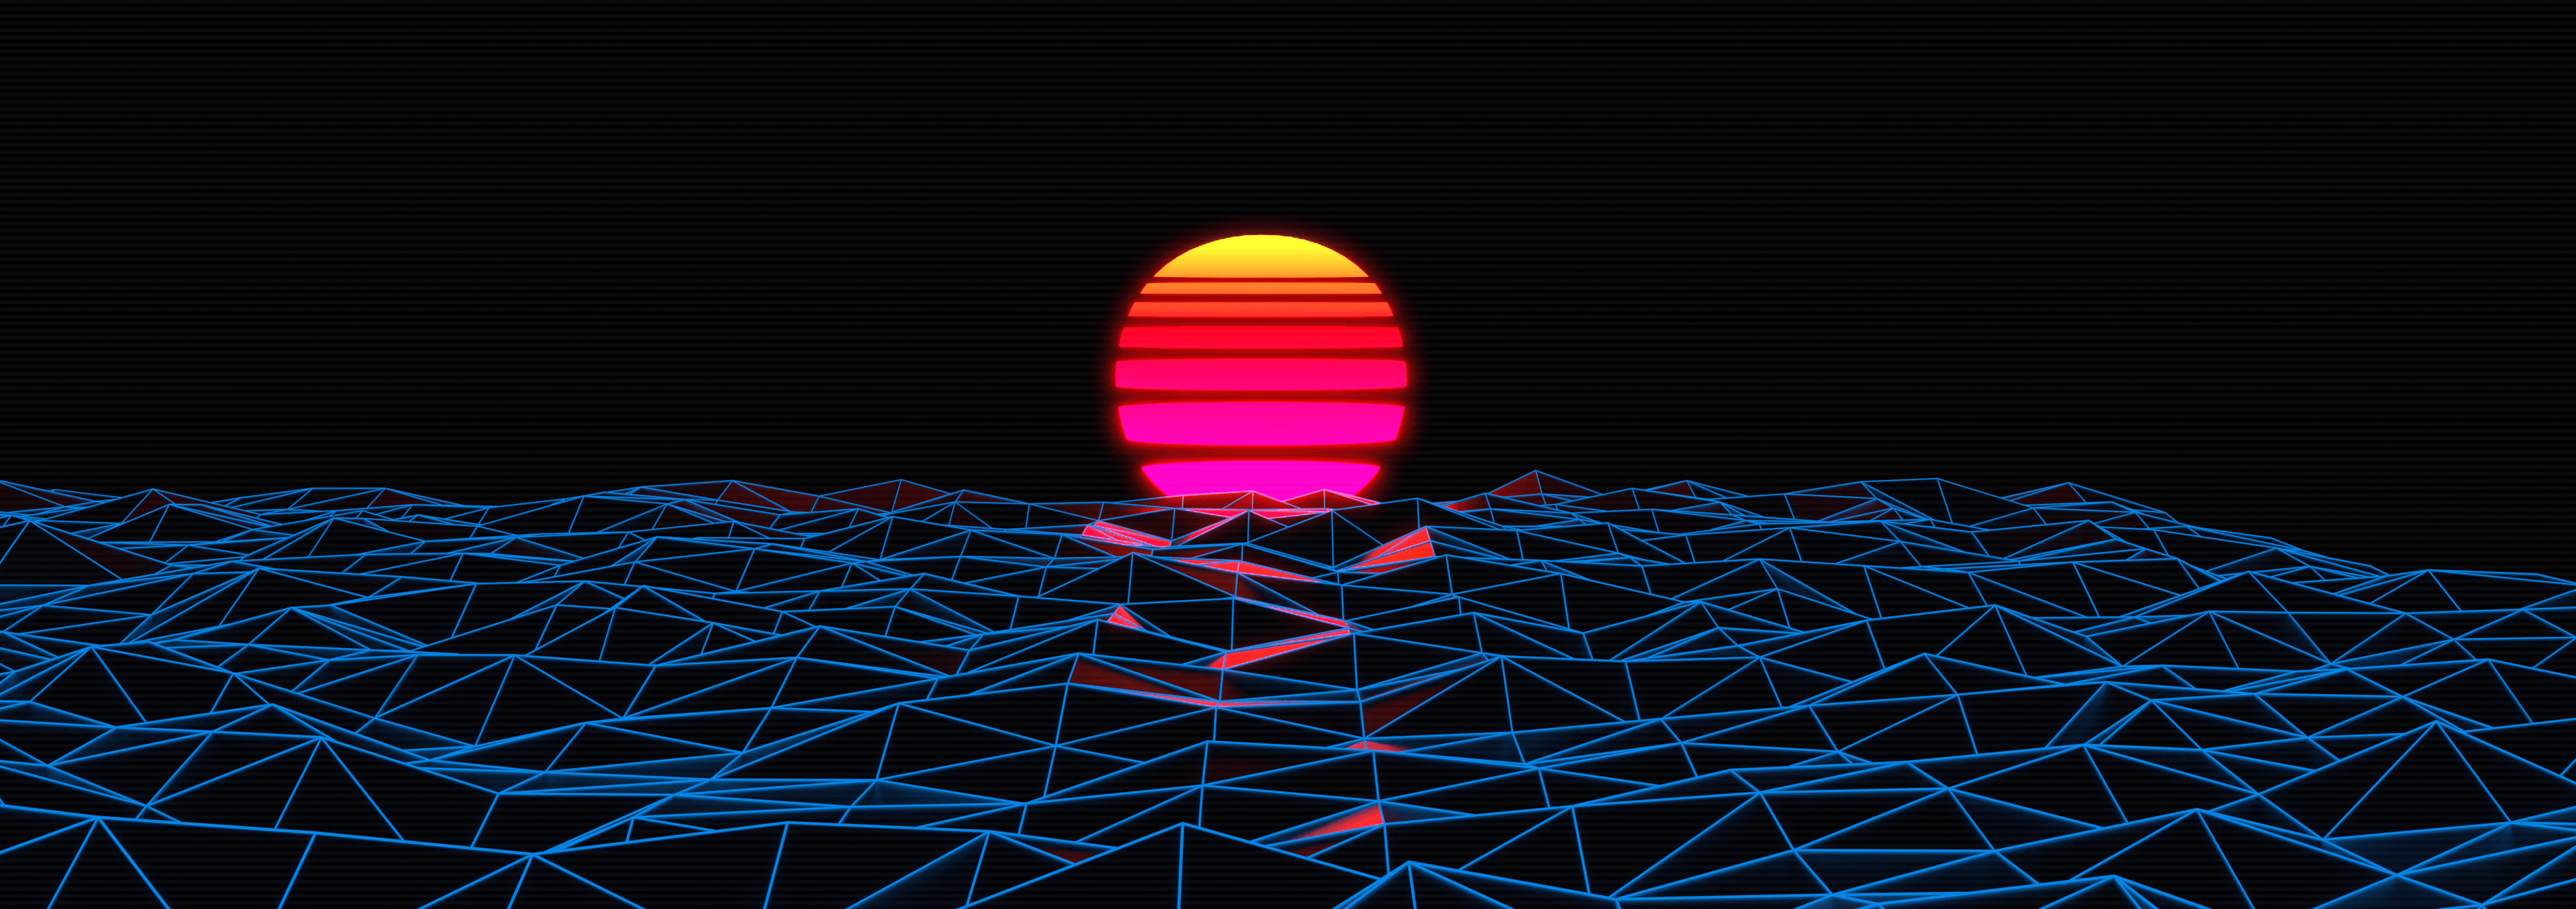 R Outrun Sunset Type Wallpaper. Any Advice On How I Can Make It A